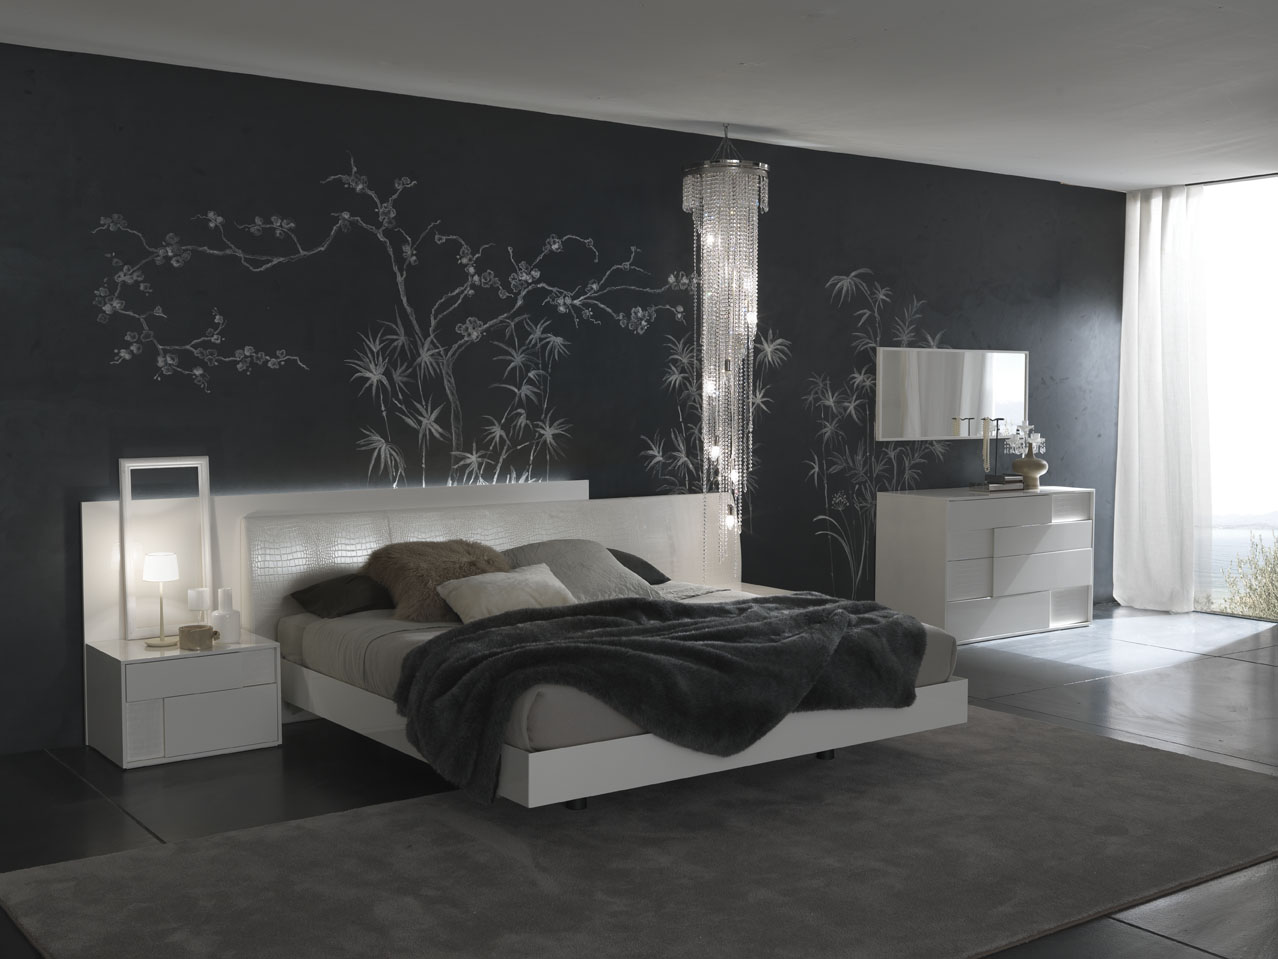 Bedroom Wall Decorating Ideas With Photos